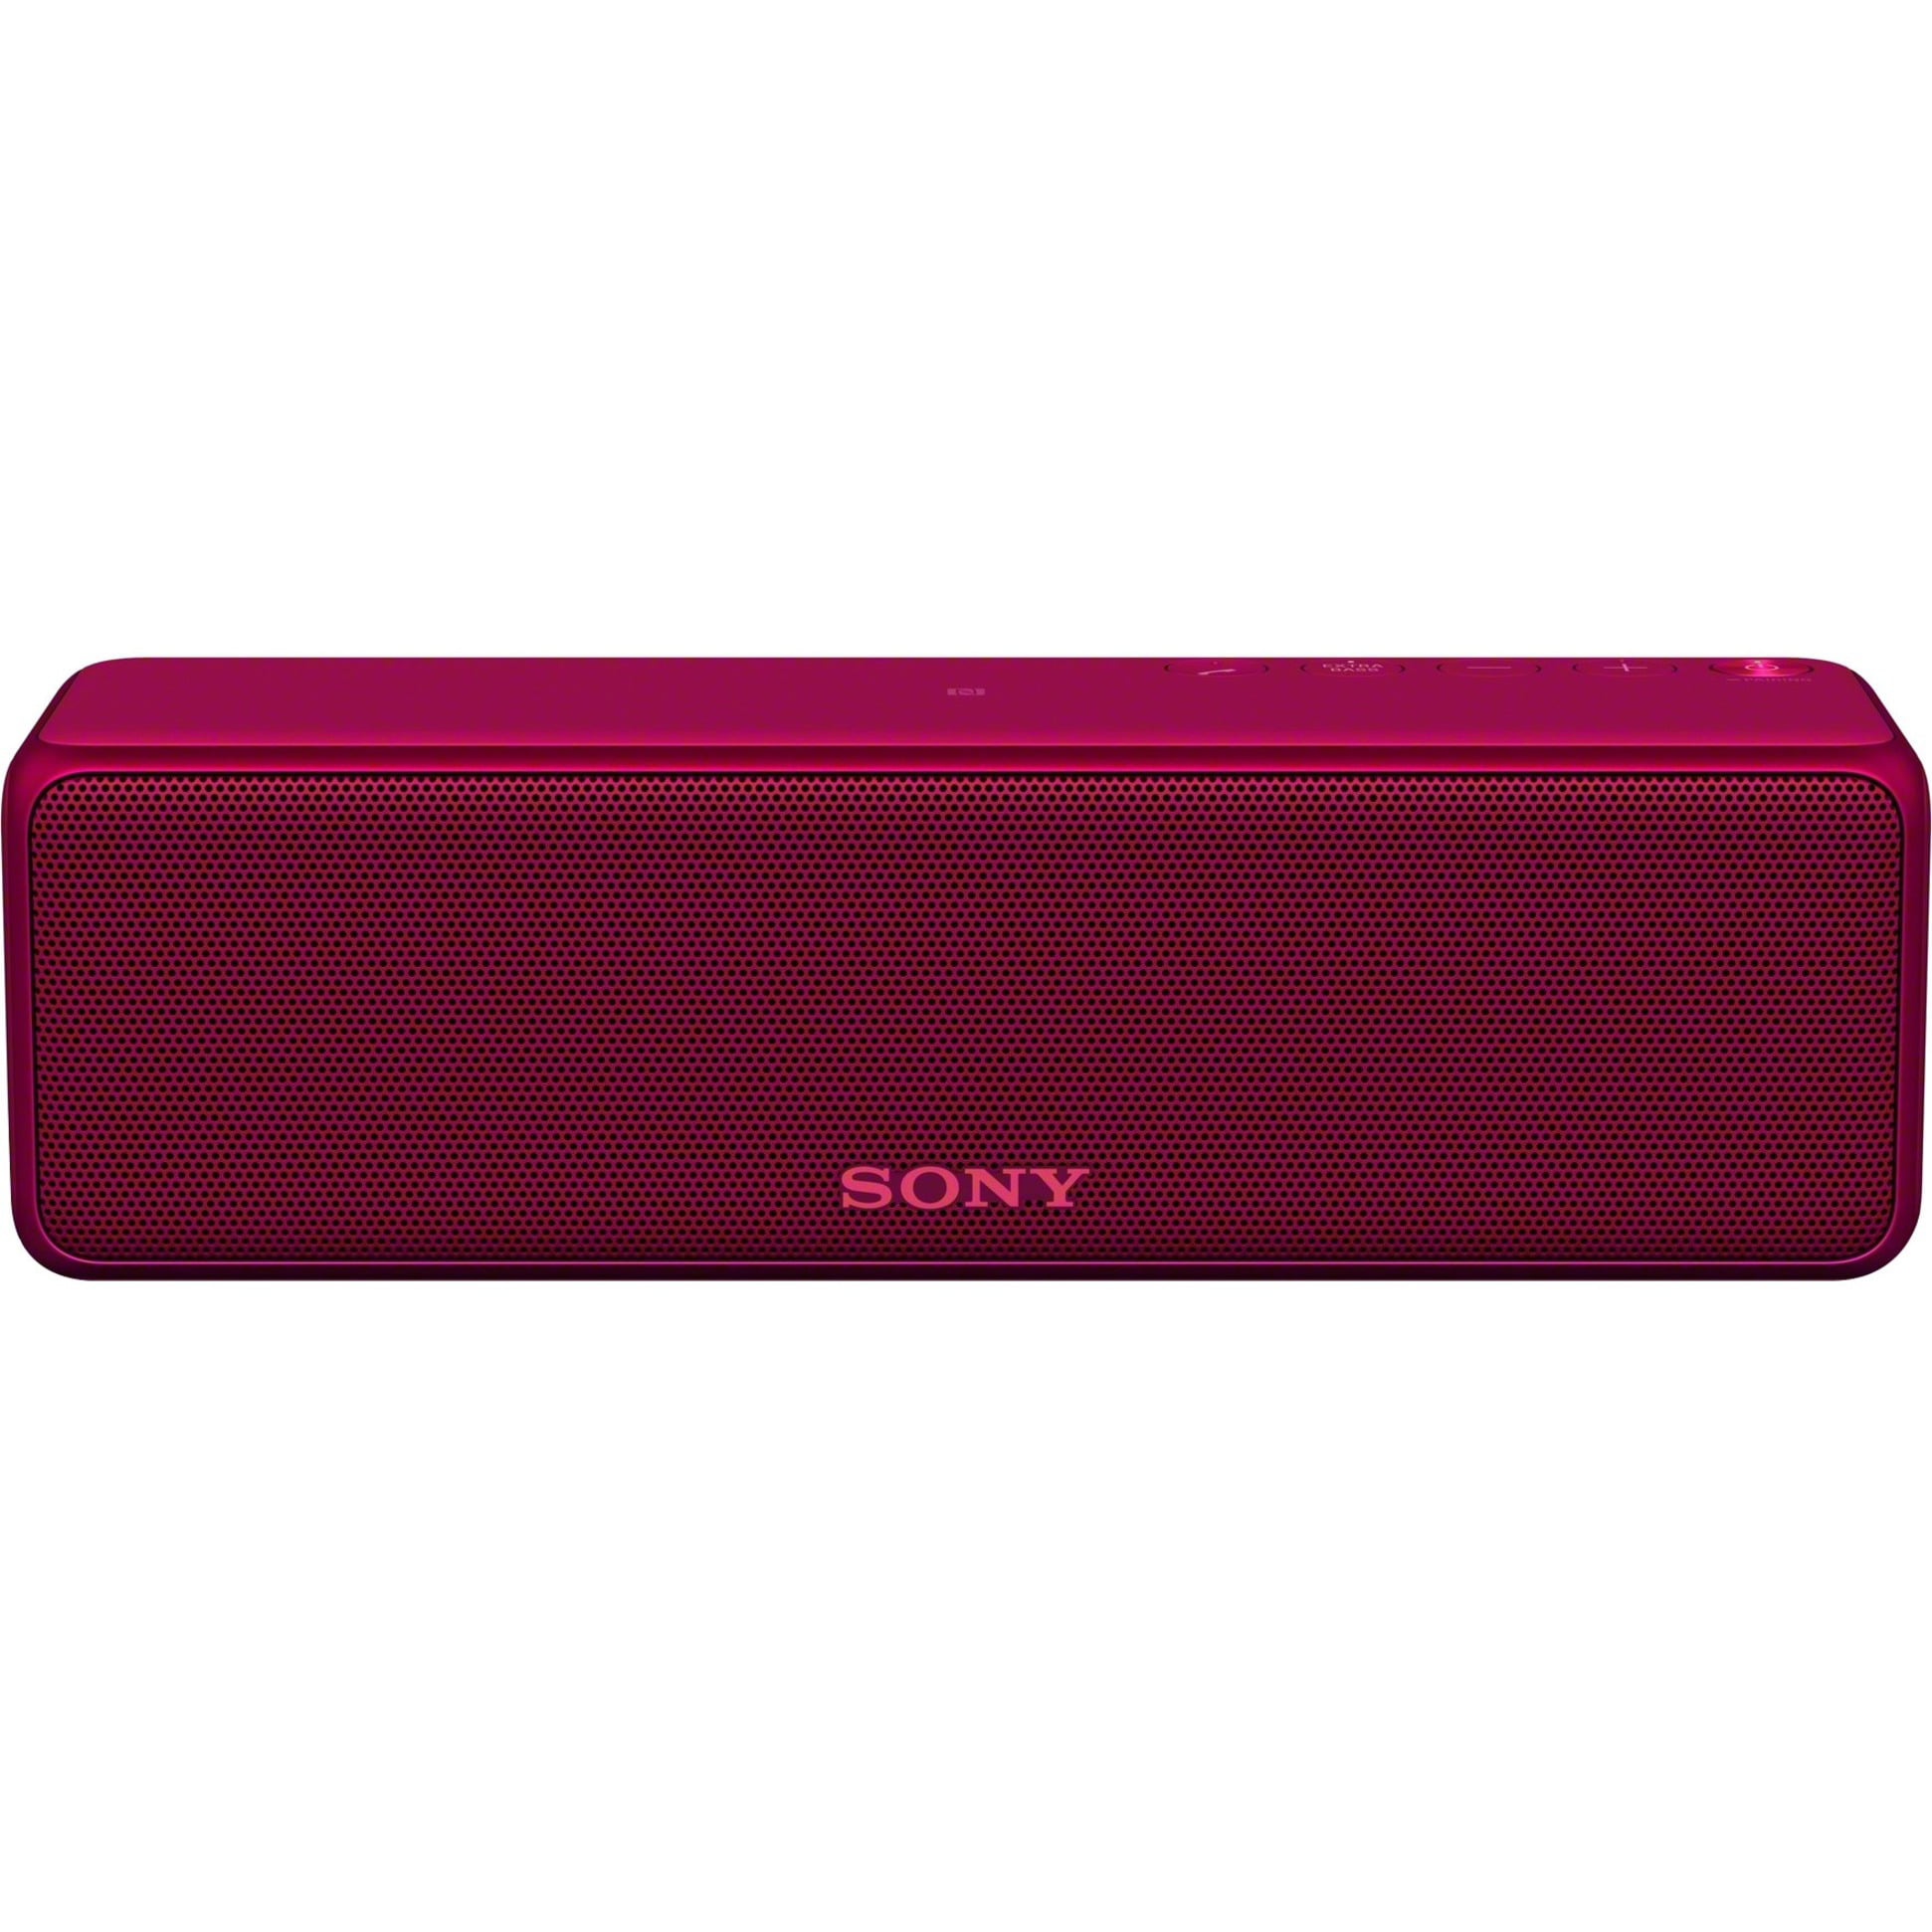 Sony h.ear go Portable Bluetooth Speaker, Lime Yellow, SRS-HG1